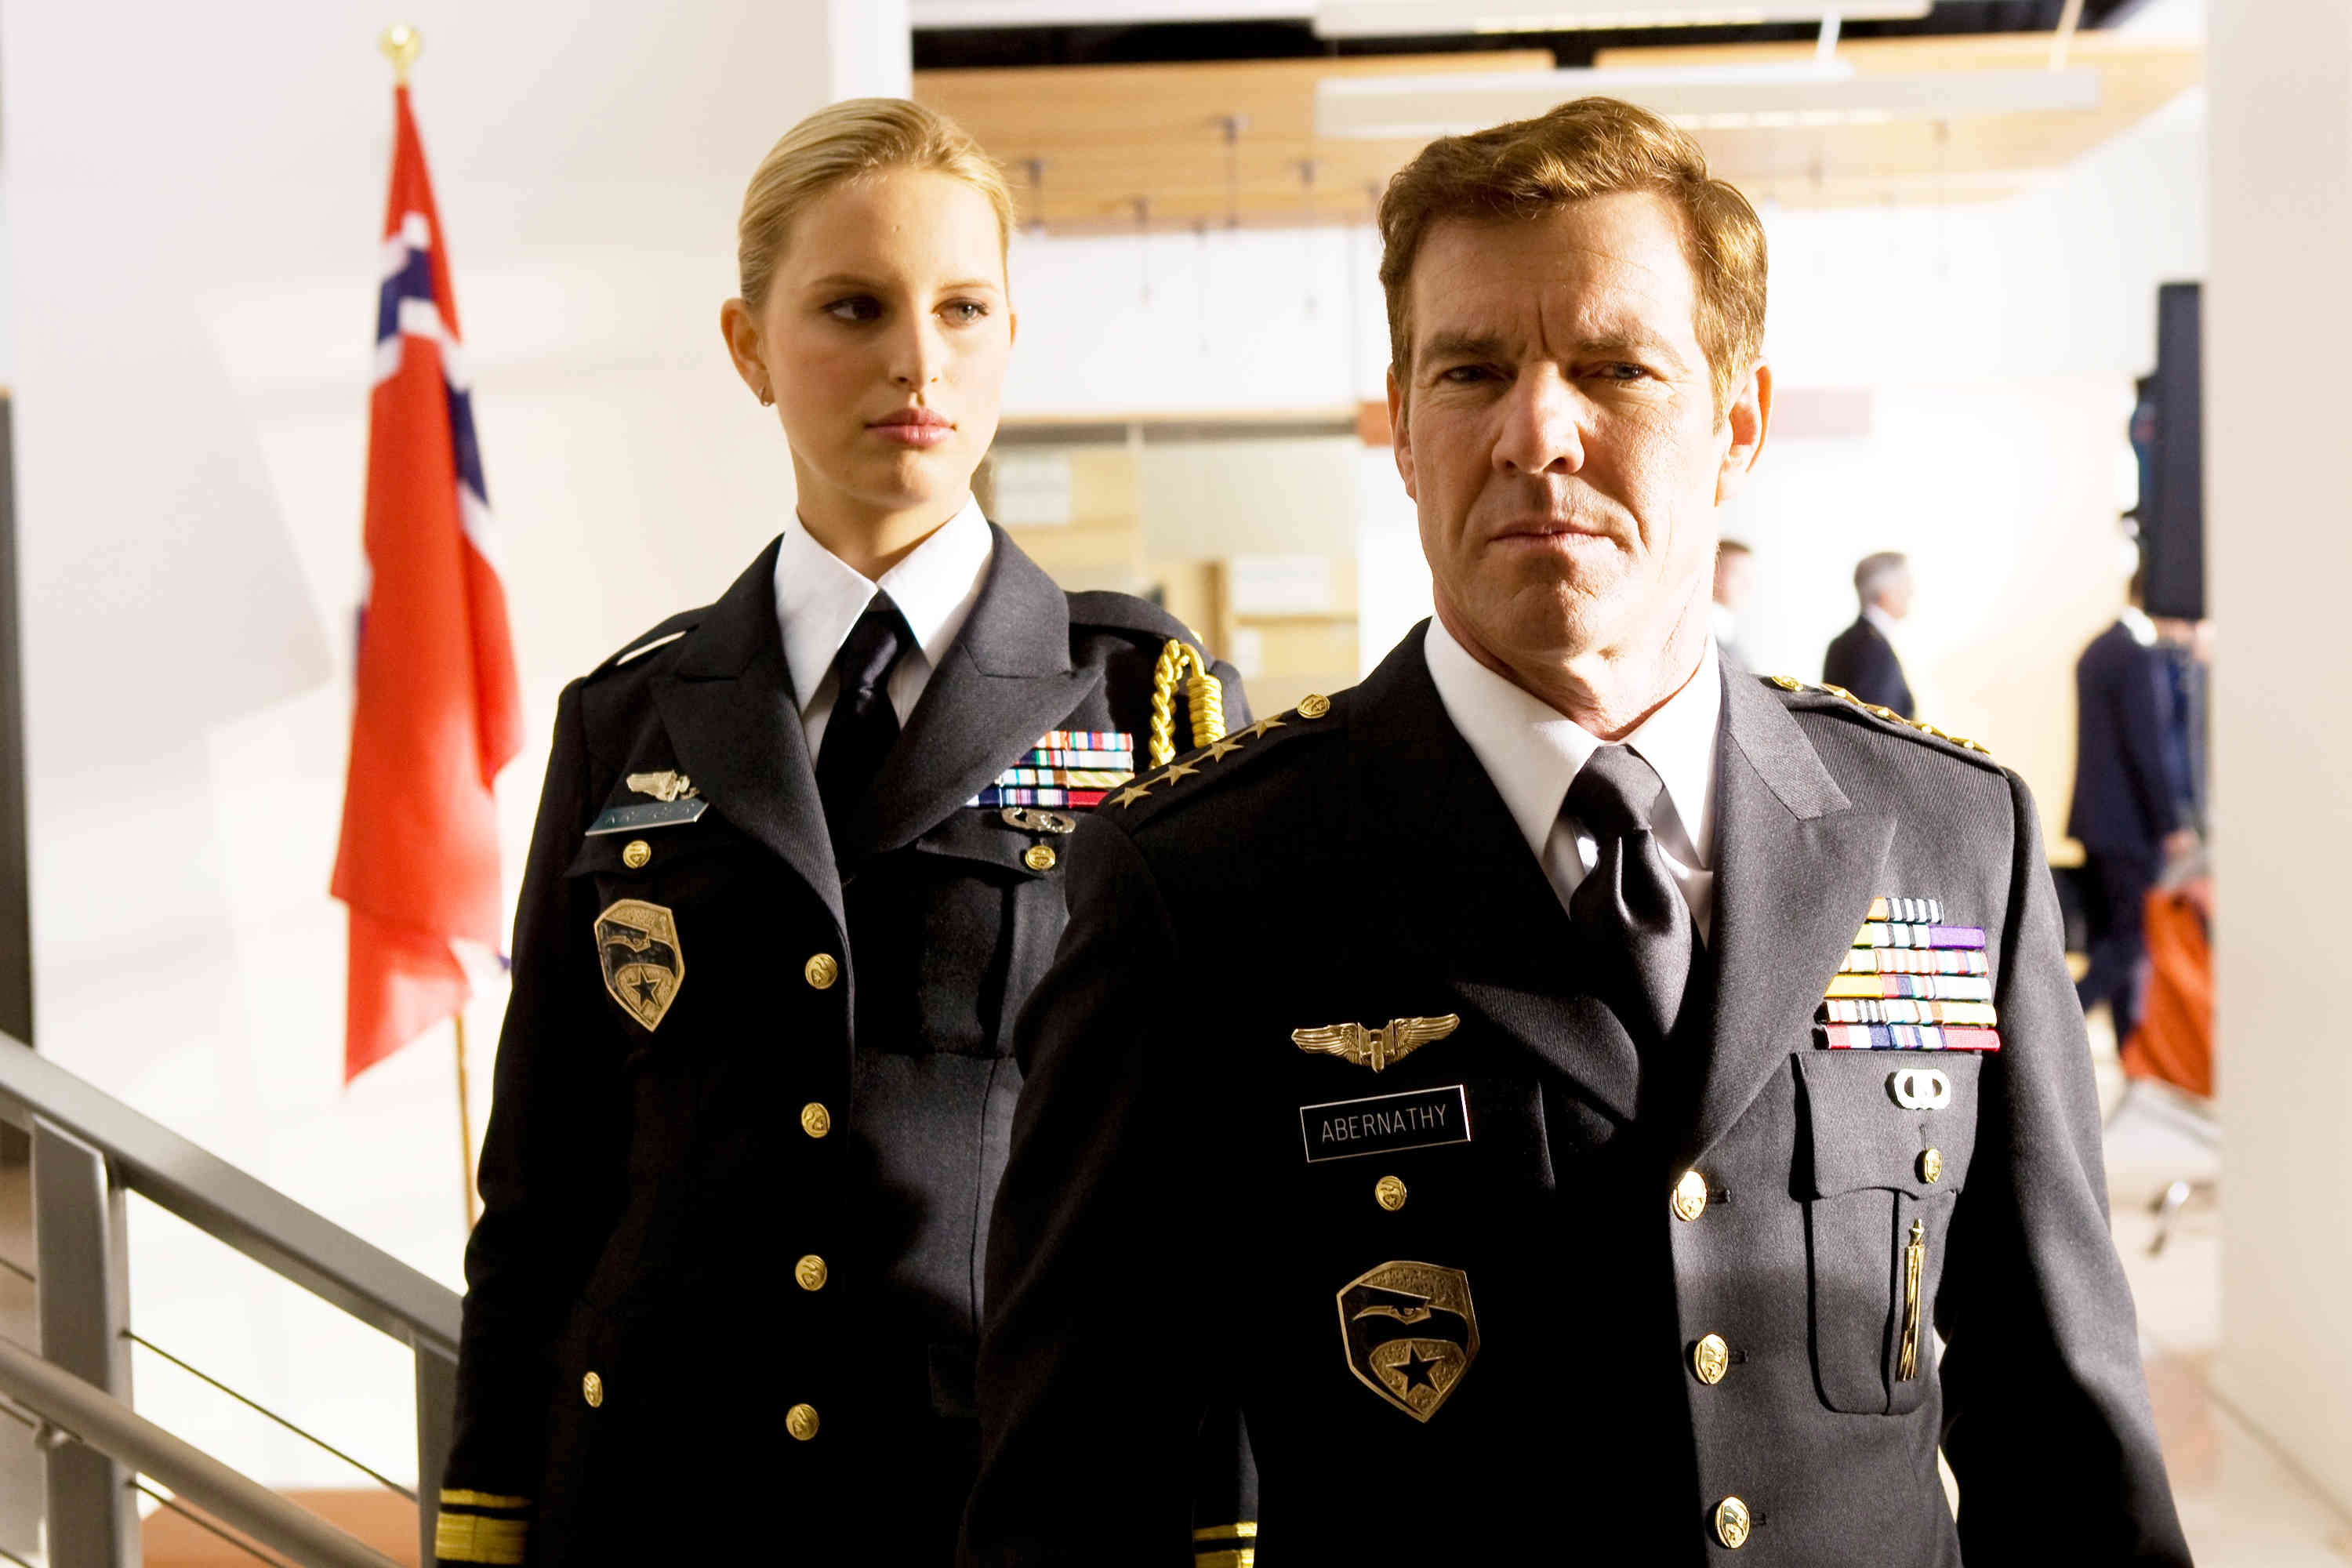 Karolina Kurkova stars as Courtney A. Kreiger / Cover girl and Dennis Quaid stars as General Hawk in Paramount Pictures' G.I. Joe: Rise of Cobra (2009)